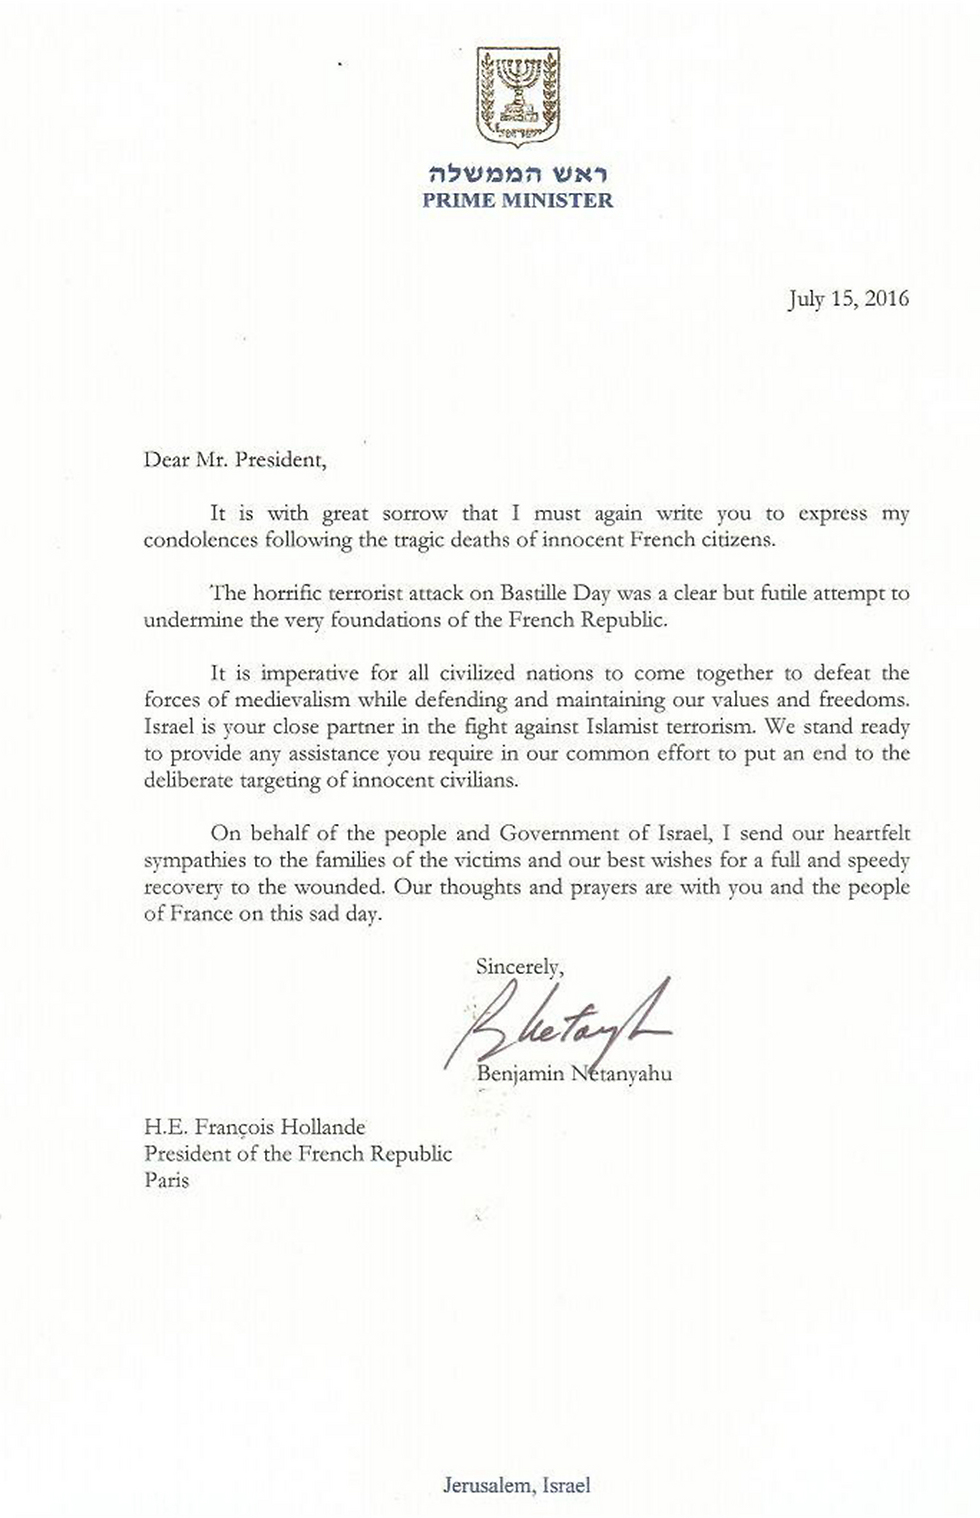 Netanyahu's letter of condolence to French PM Hollande